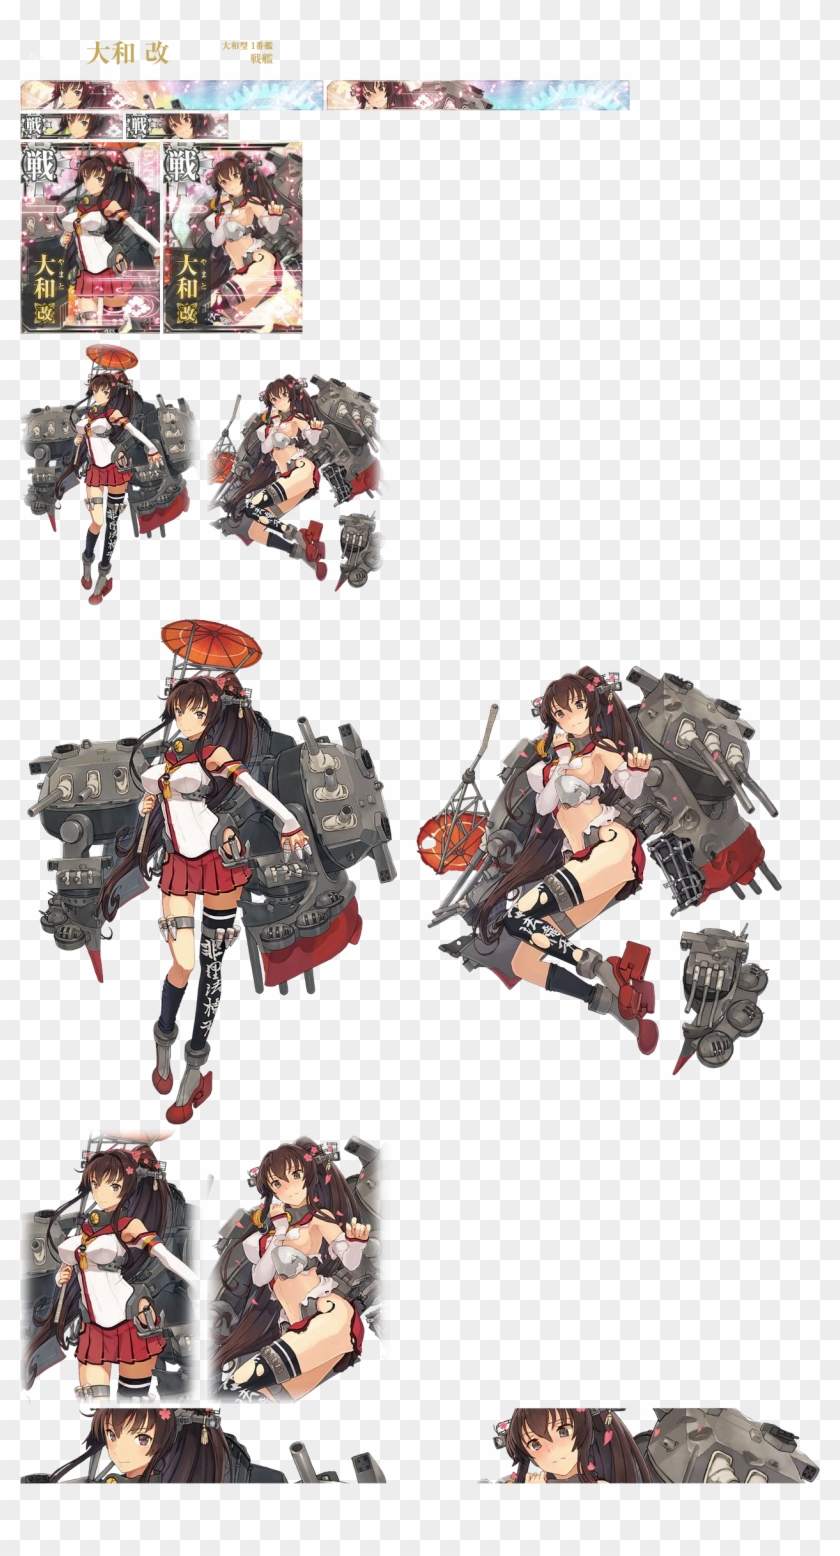 Click For Full Sized Image Yamato Kai Png Download 艦隊 これ く しょ ん キャラクター Transparent Png 1252x2260 Pngfind